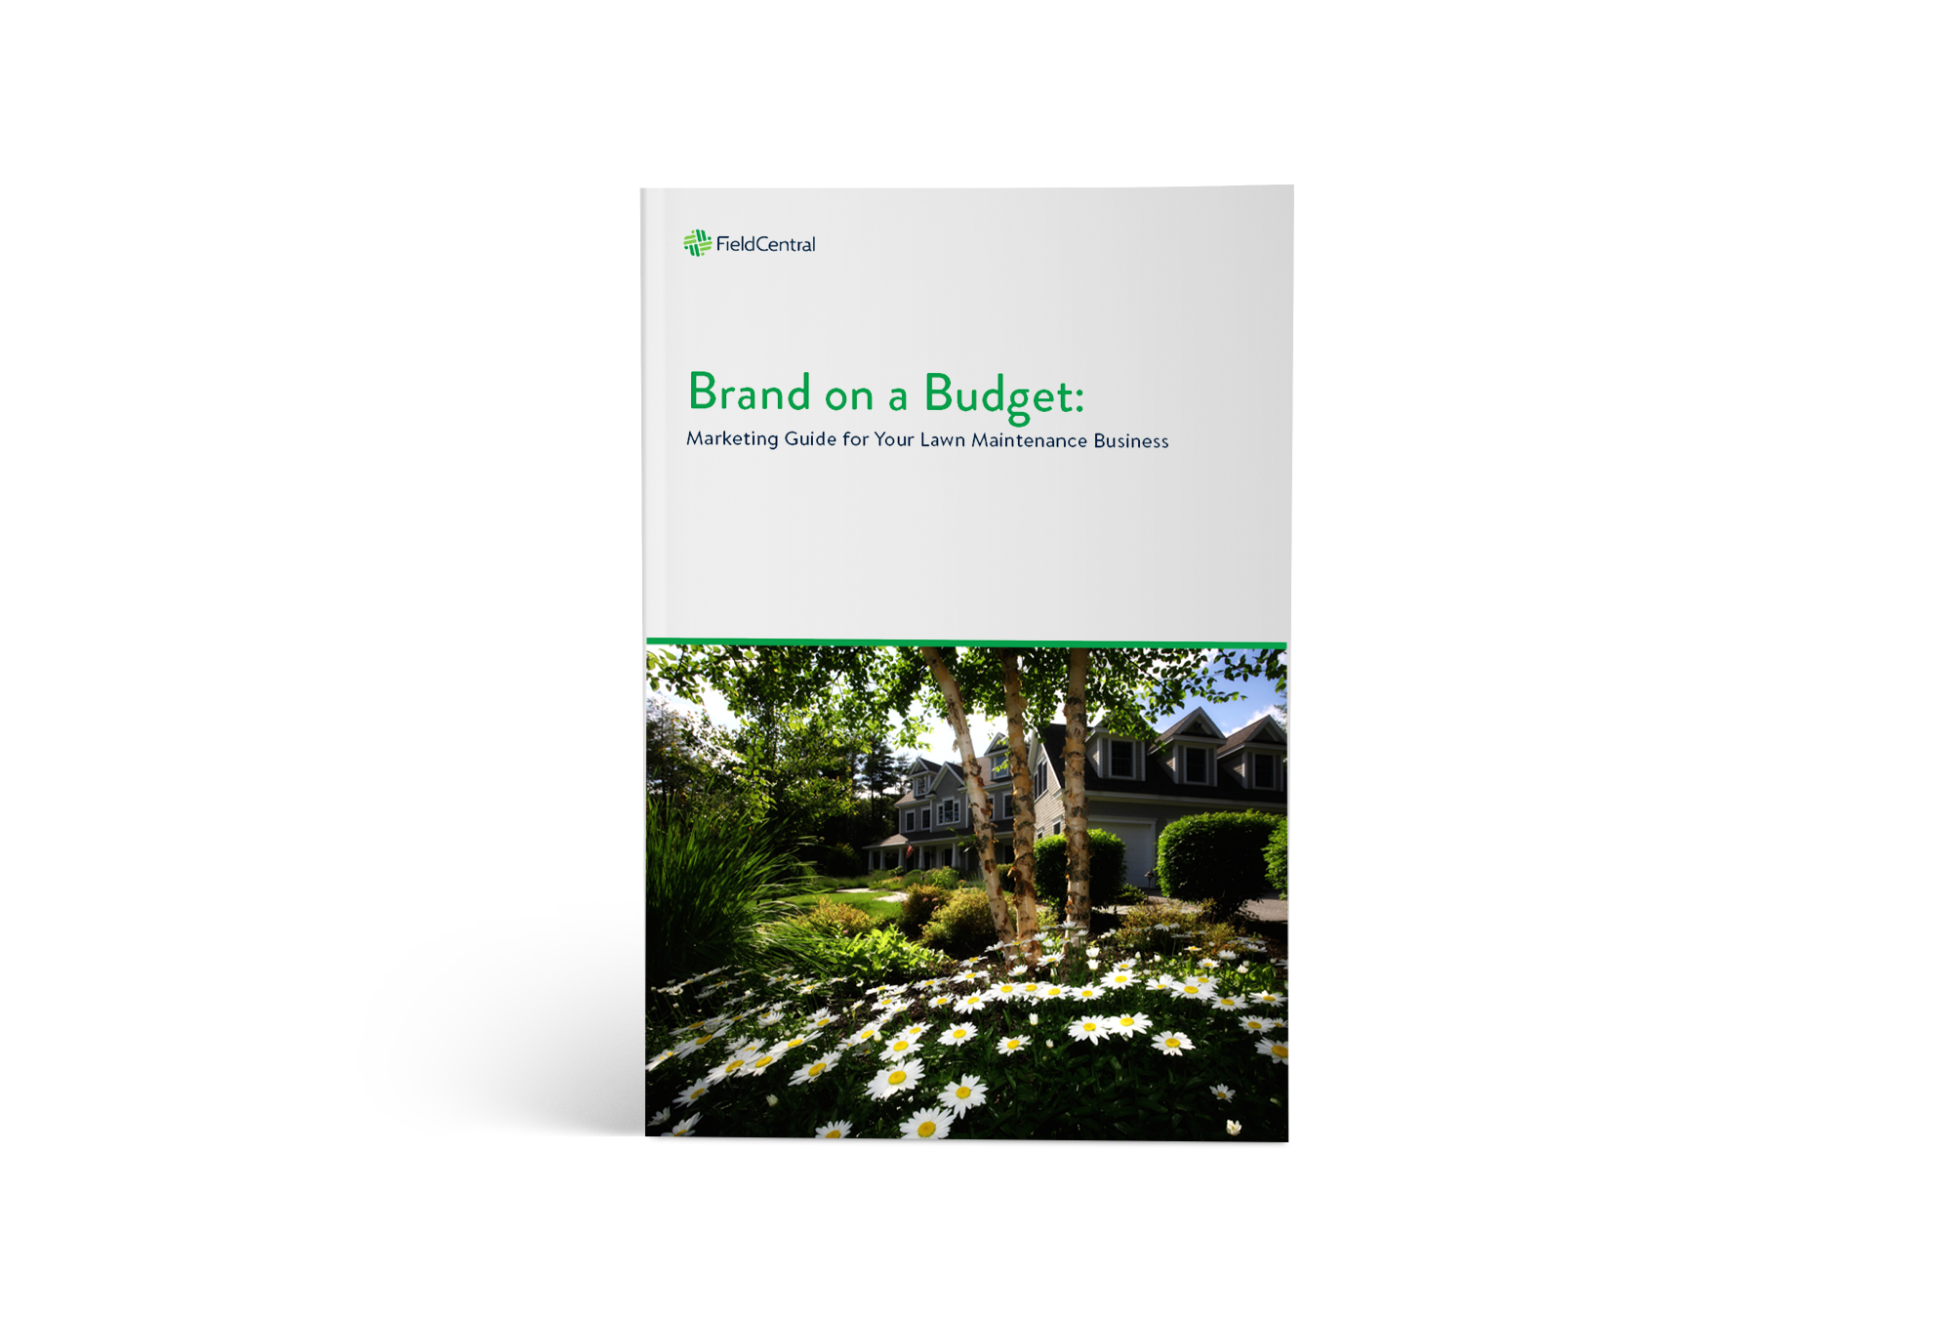 Brand on a Budget: Marketing Guide for Your Lawn Maintenance Business ebook cover. 